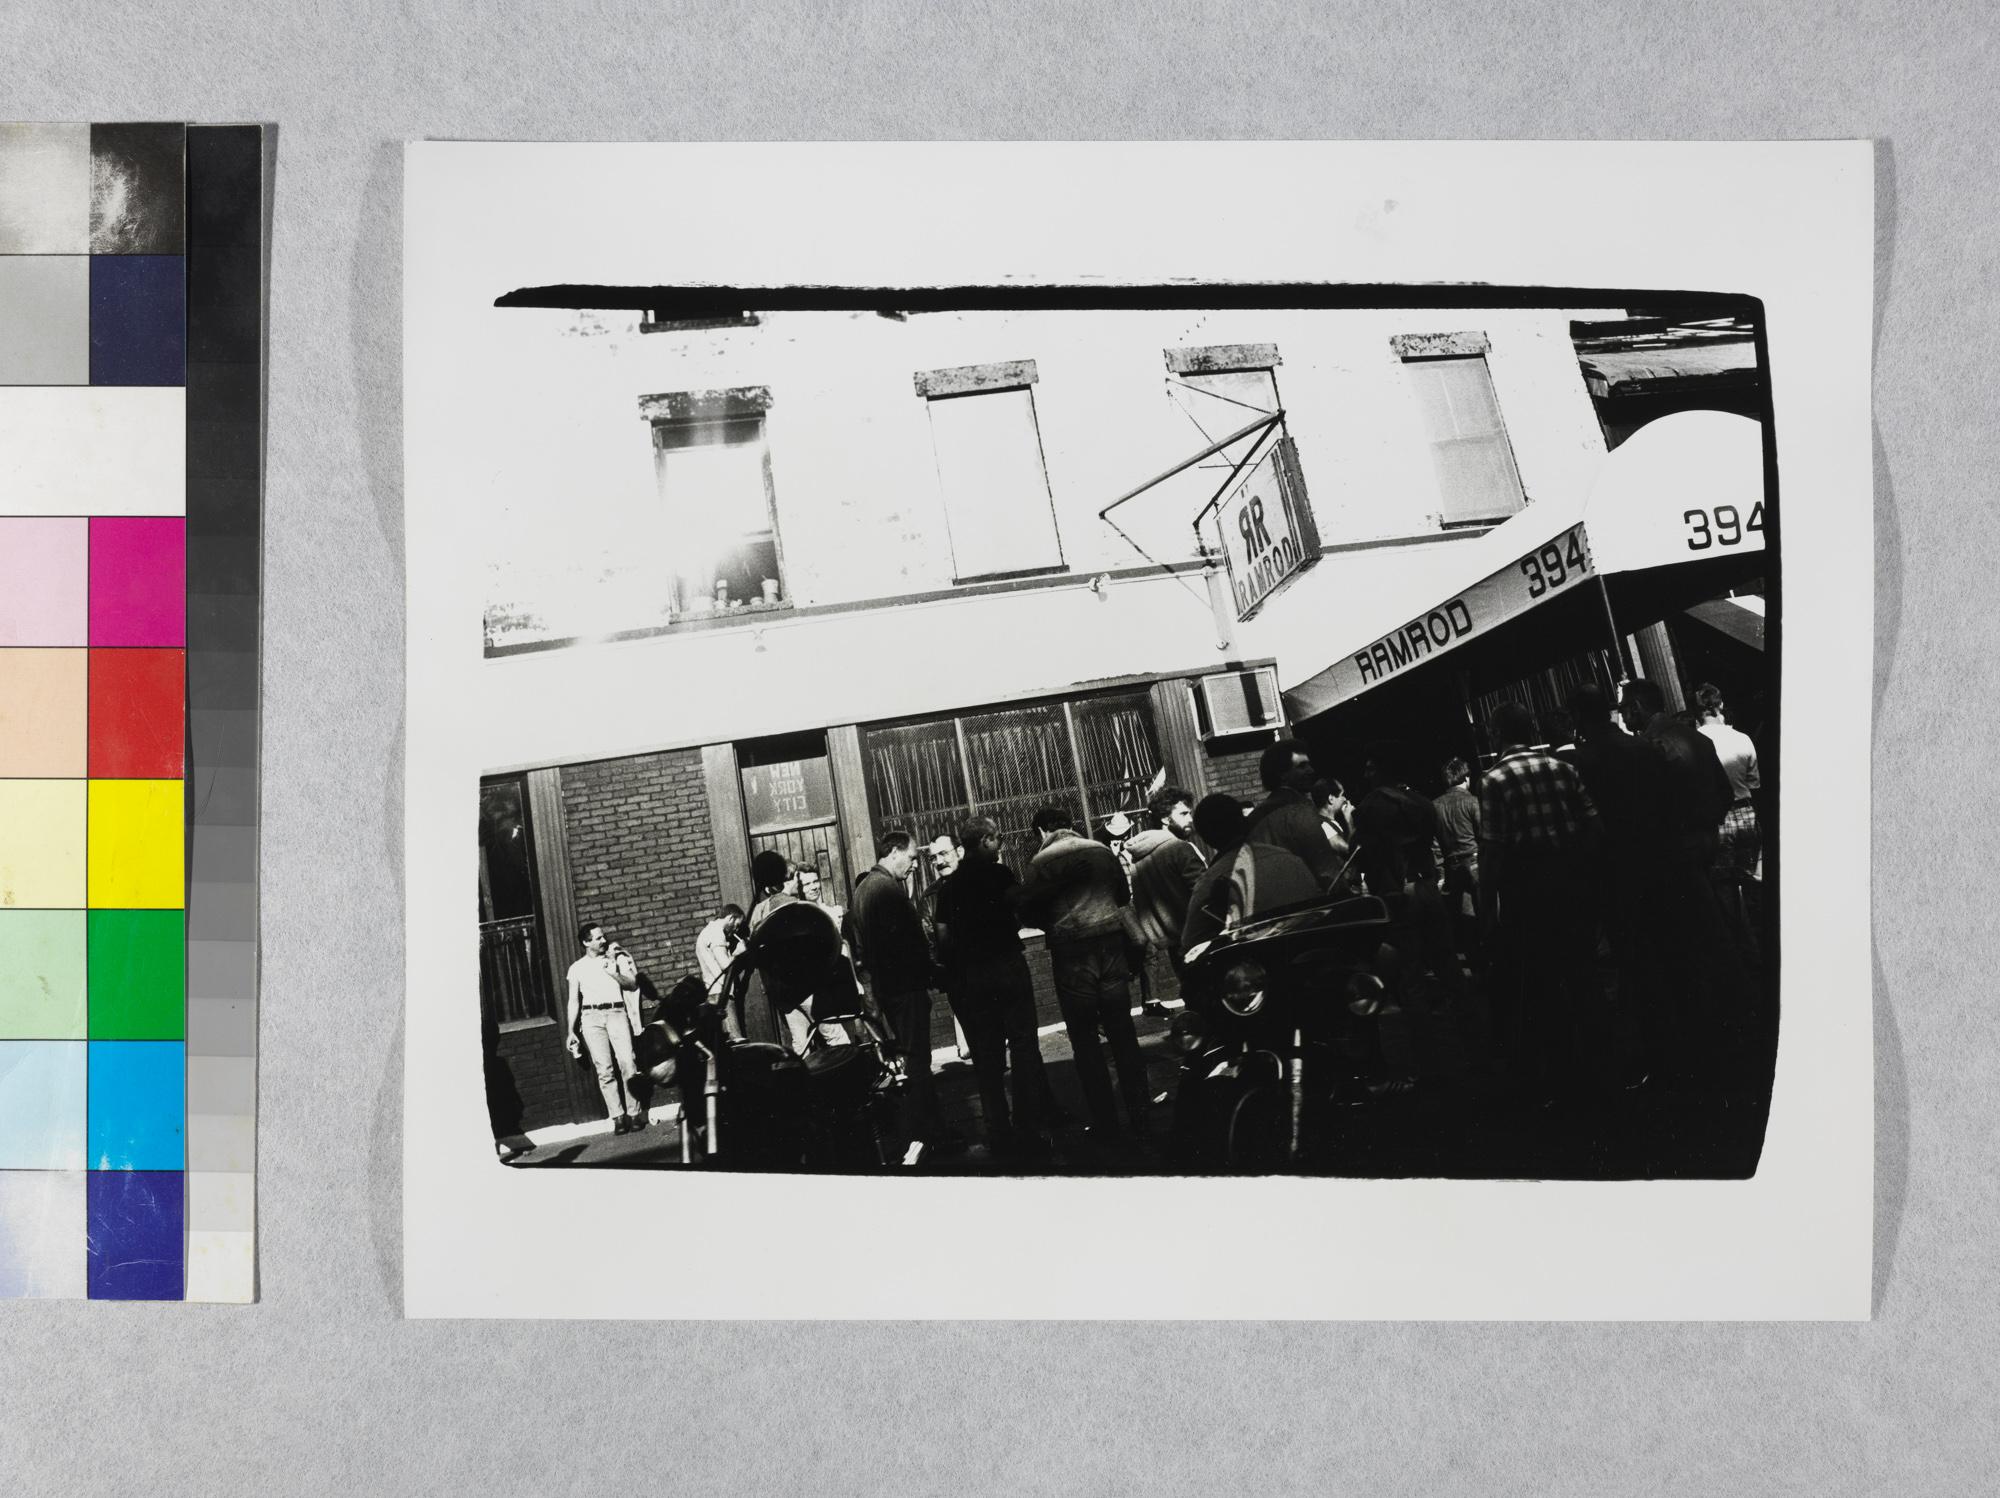 Gelatin silver print of People on the Street at Ramrod Bar in NYC by Andy Warhol For Sale 2